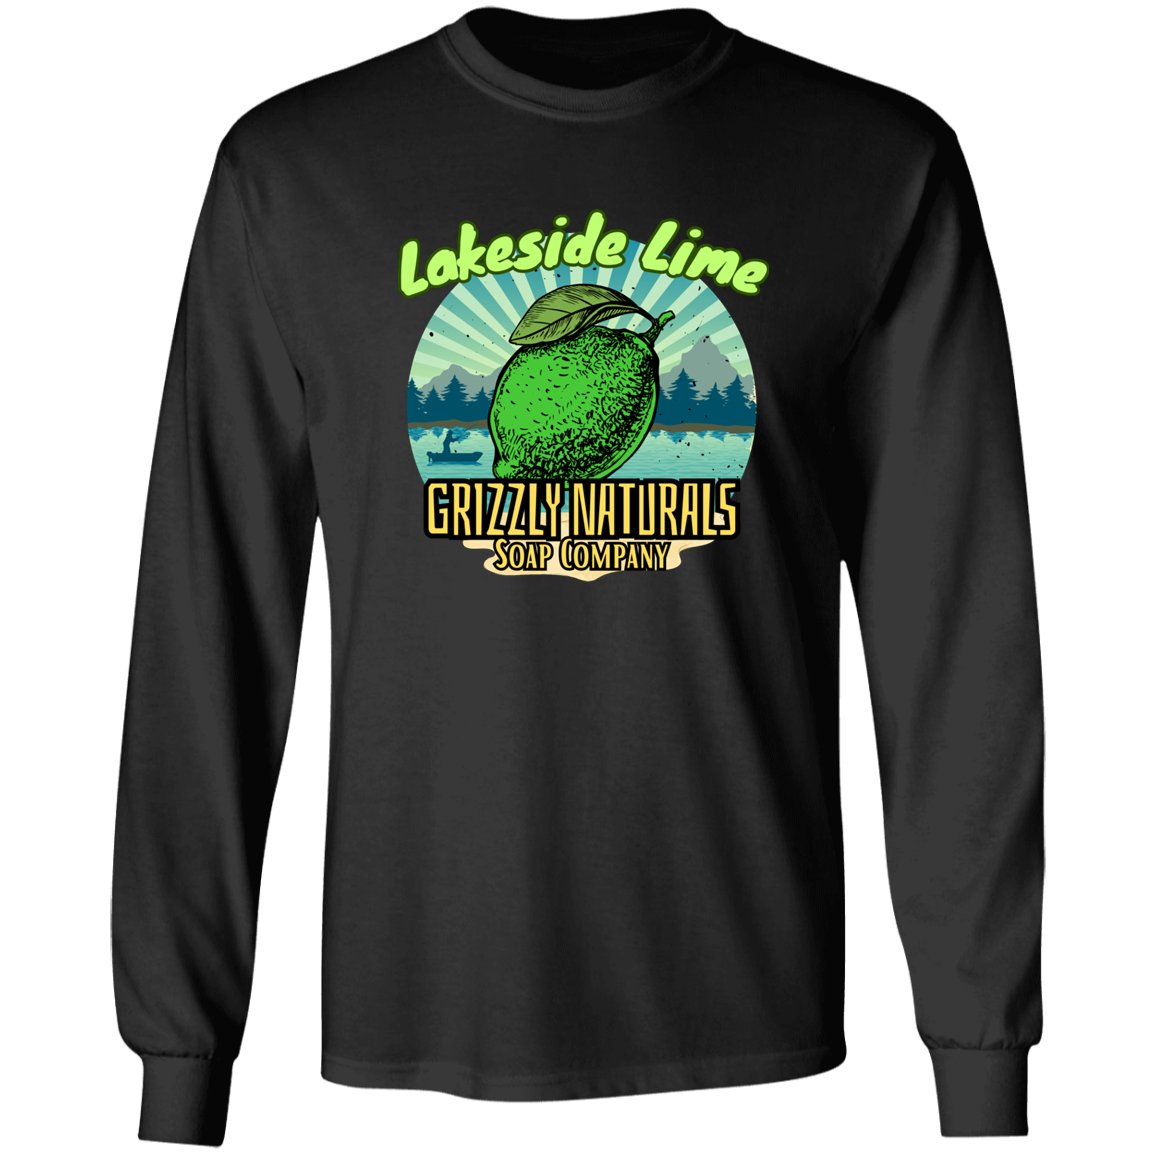 Grizzly Naturals Apparel - Lakeside Lime - Grizzly Naturals Soap Company